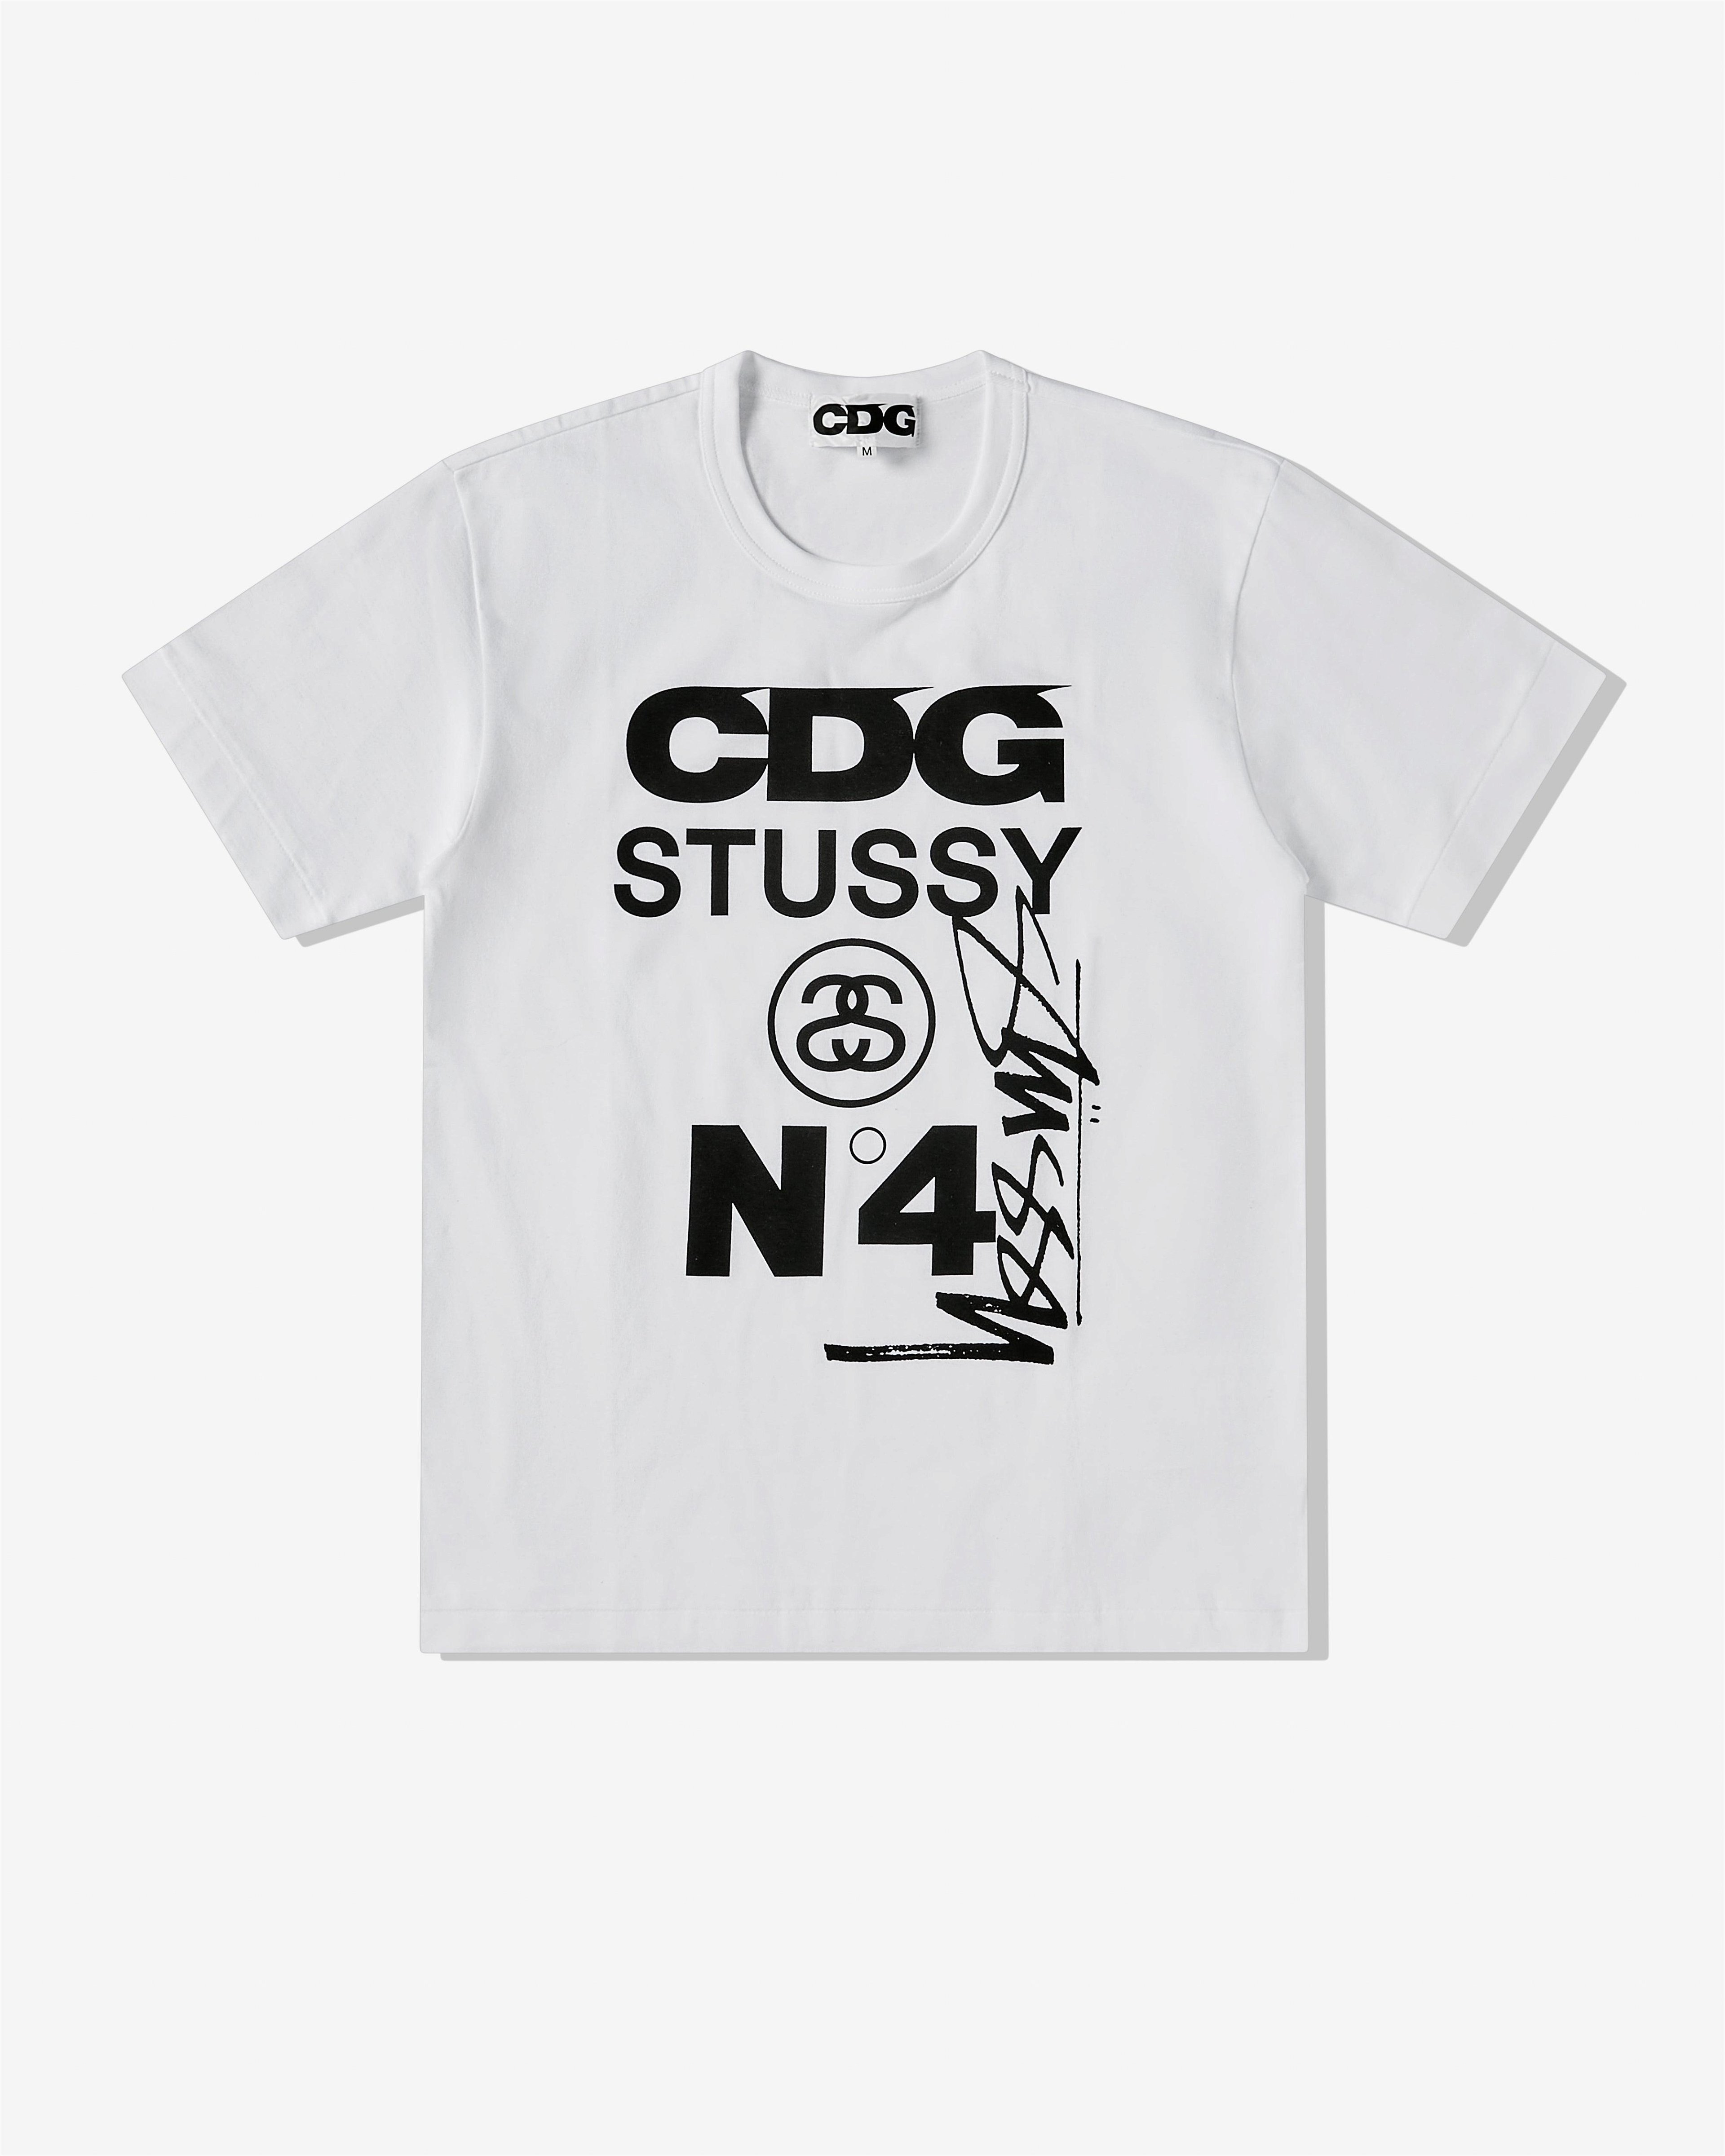 CDG - Stüssy T-Shirt - (White) by COMME DES GARCONS